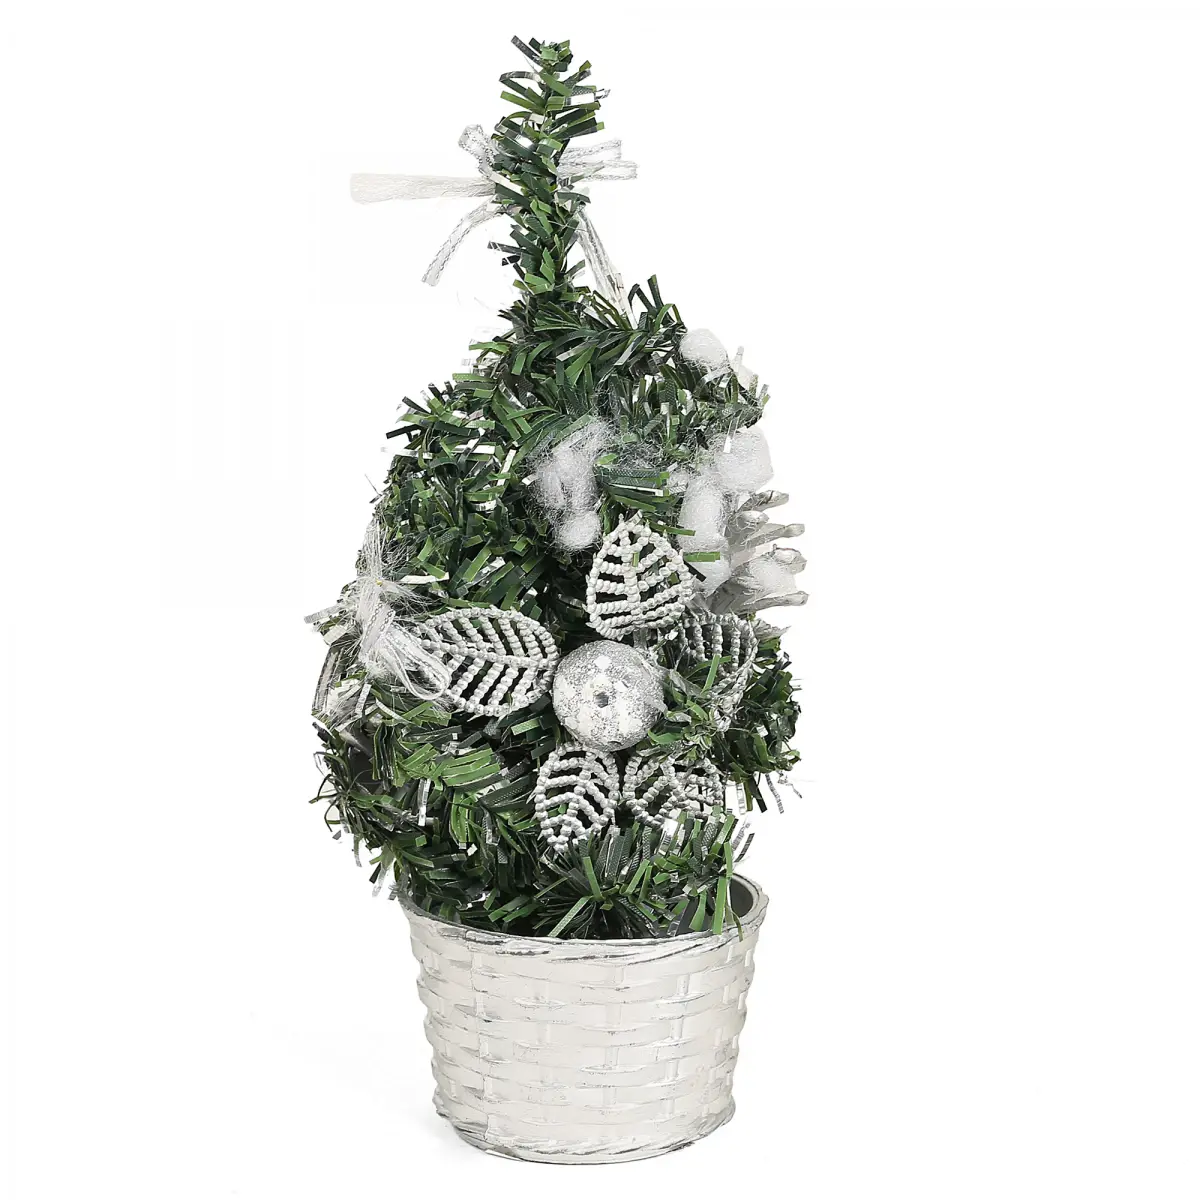 Archies Christmas Tree Decorations, 20cm, Green